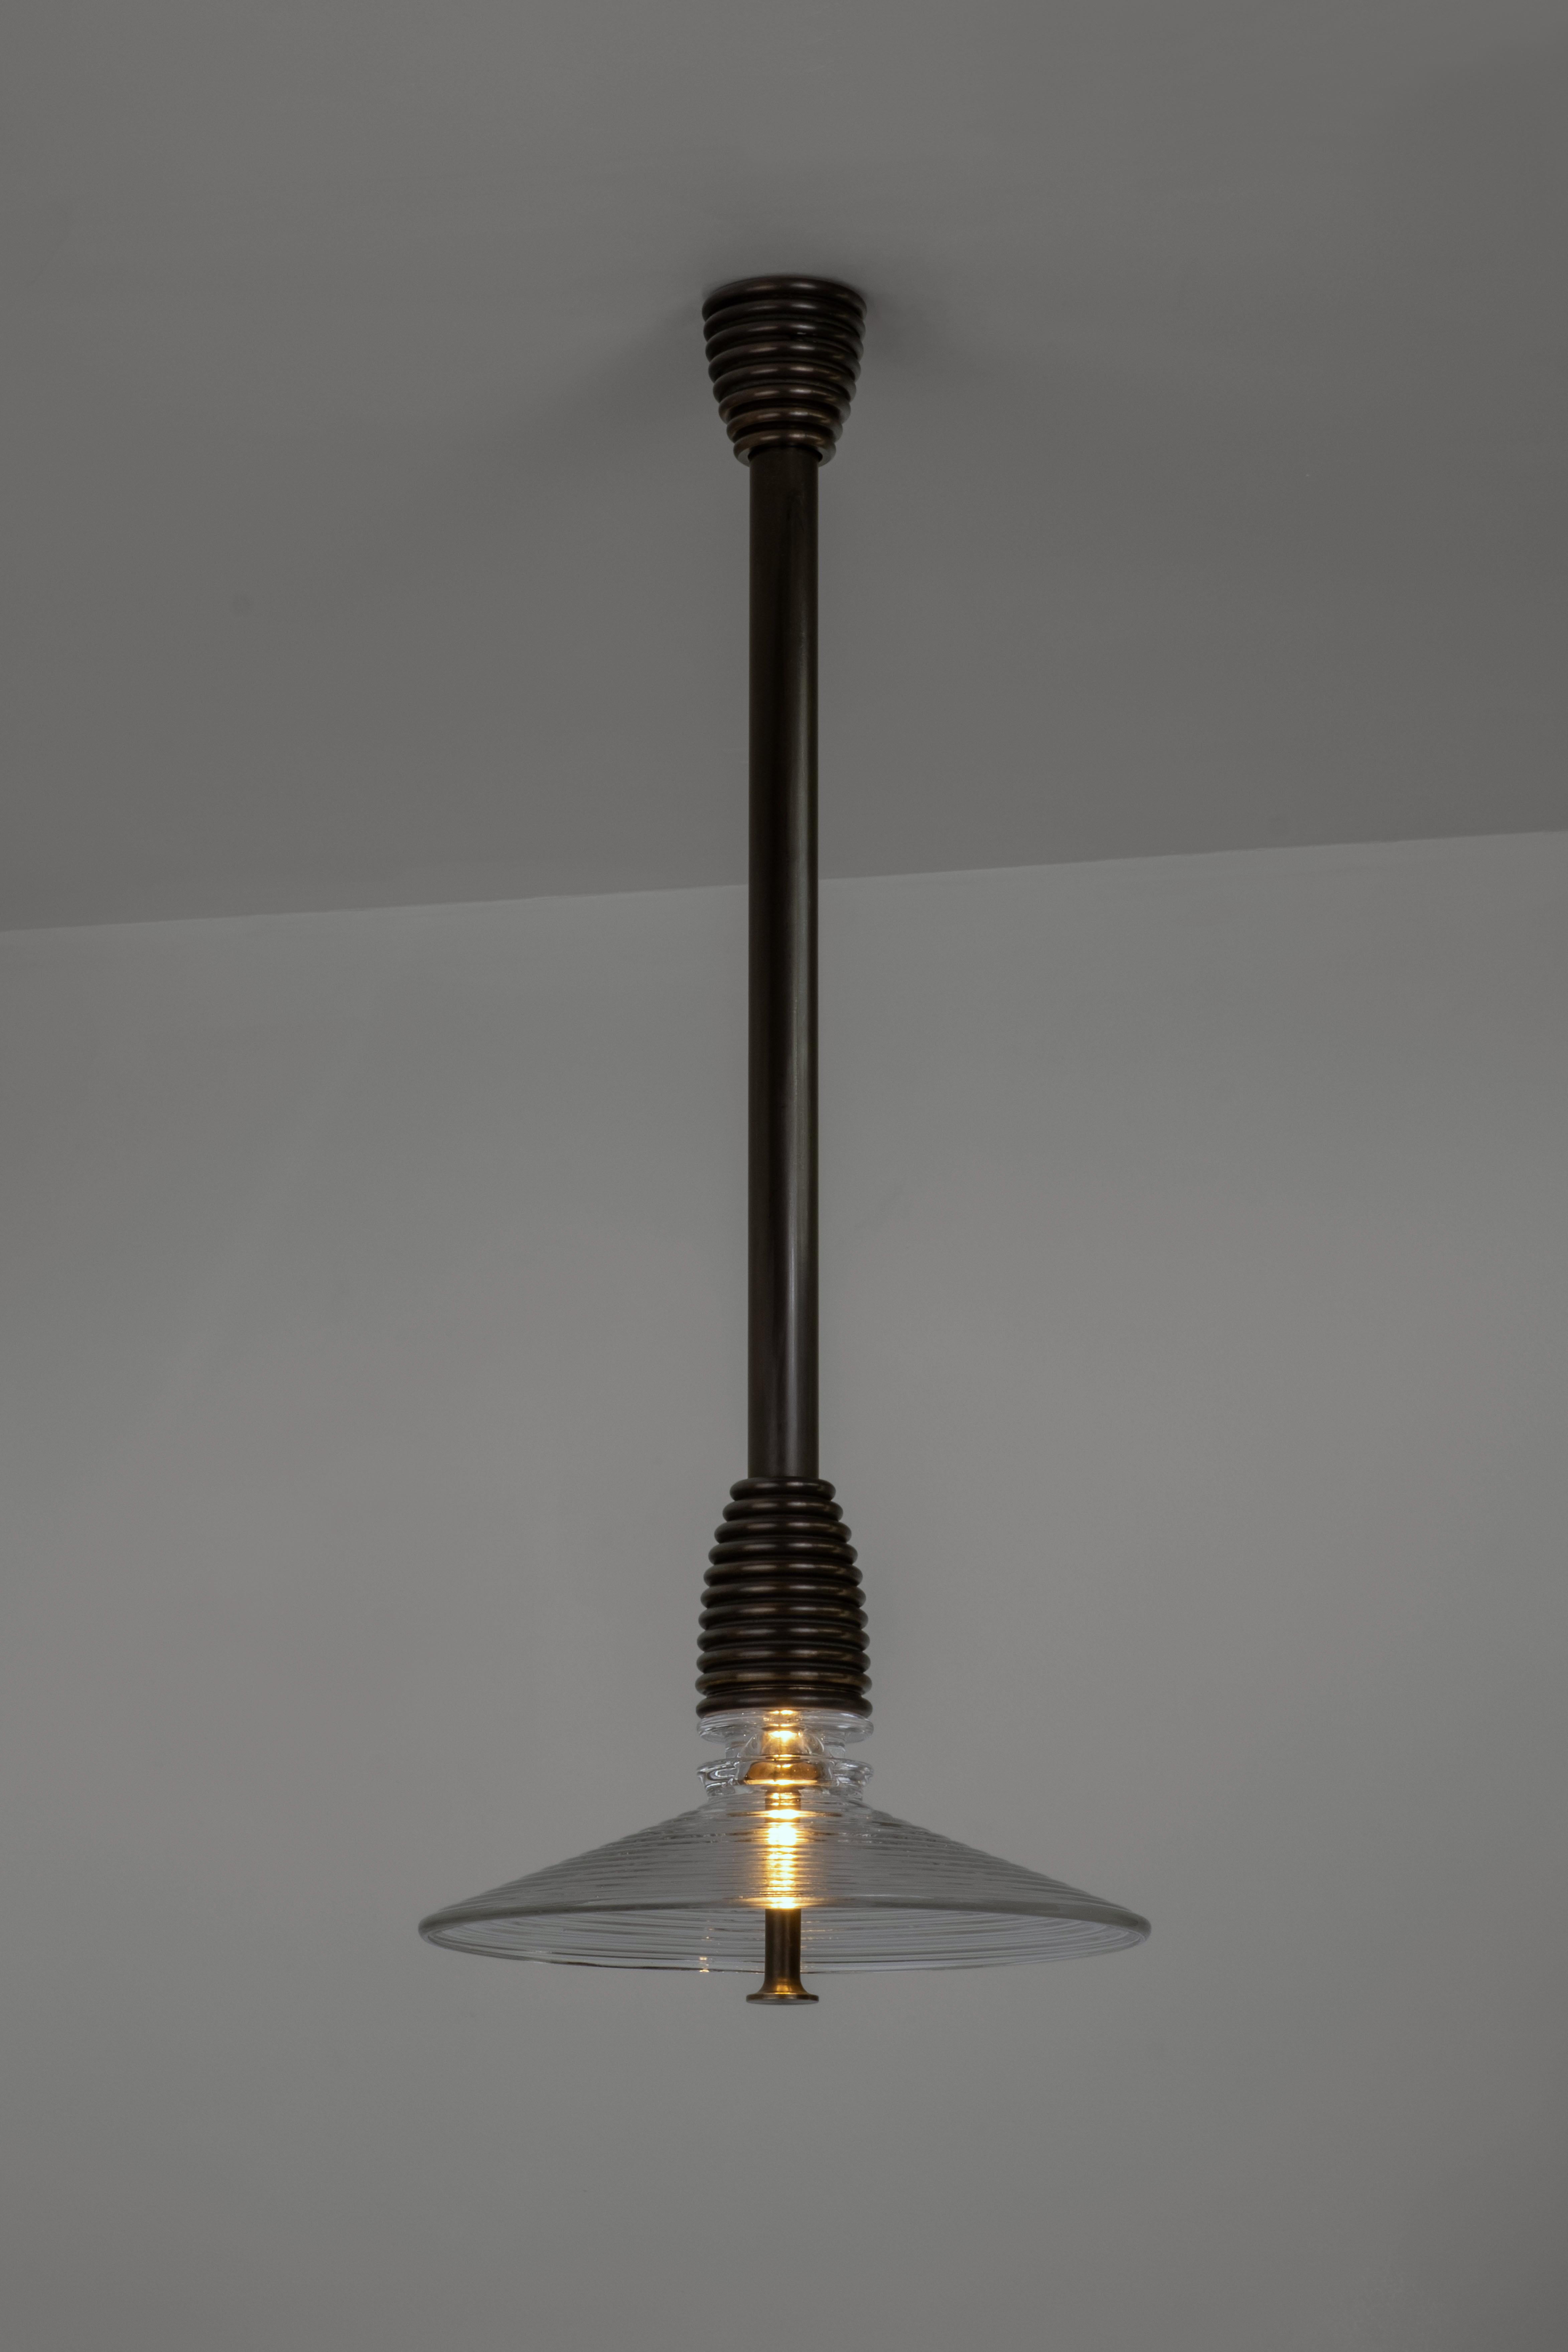 Insulator B Clear Glass and Dark Brass Pendant by Novocastrian
Dimensions: Ø 32 x H 21 cm. Rod lenght: 85 or 125 cm.
Materials: Clear glass and dark brass.  

All products are available in custom dimensions and finishes. Rods can be cut to length or